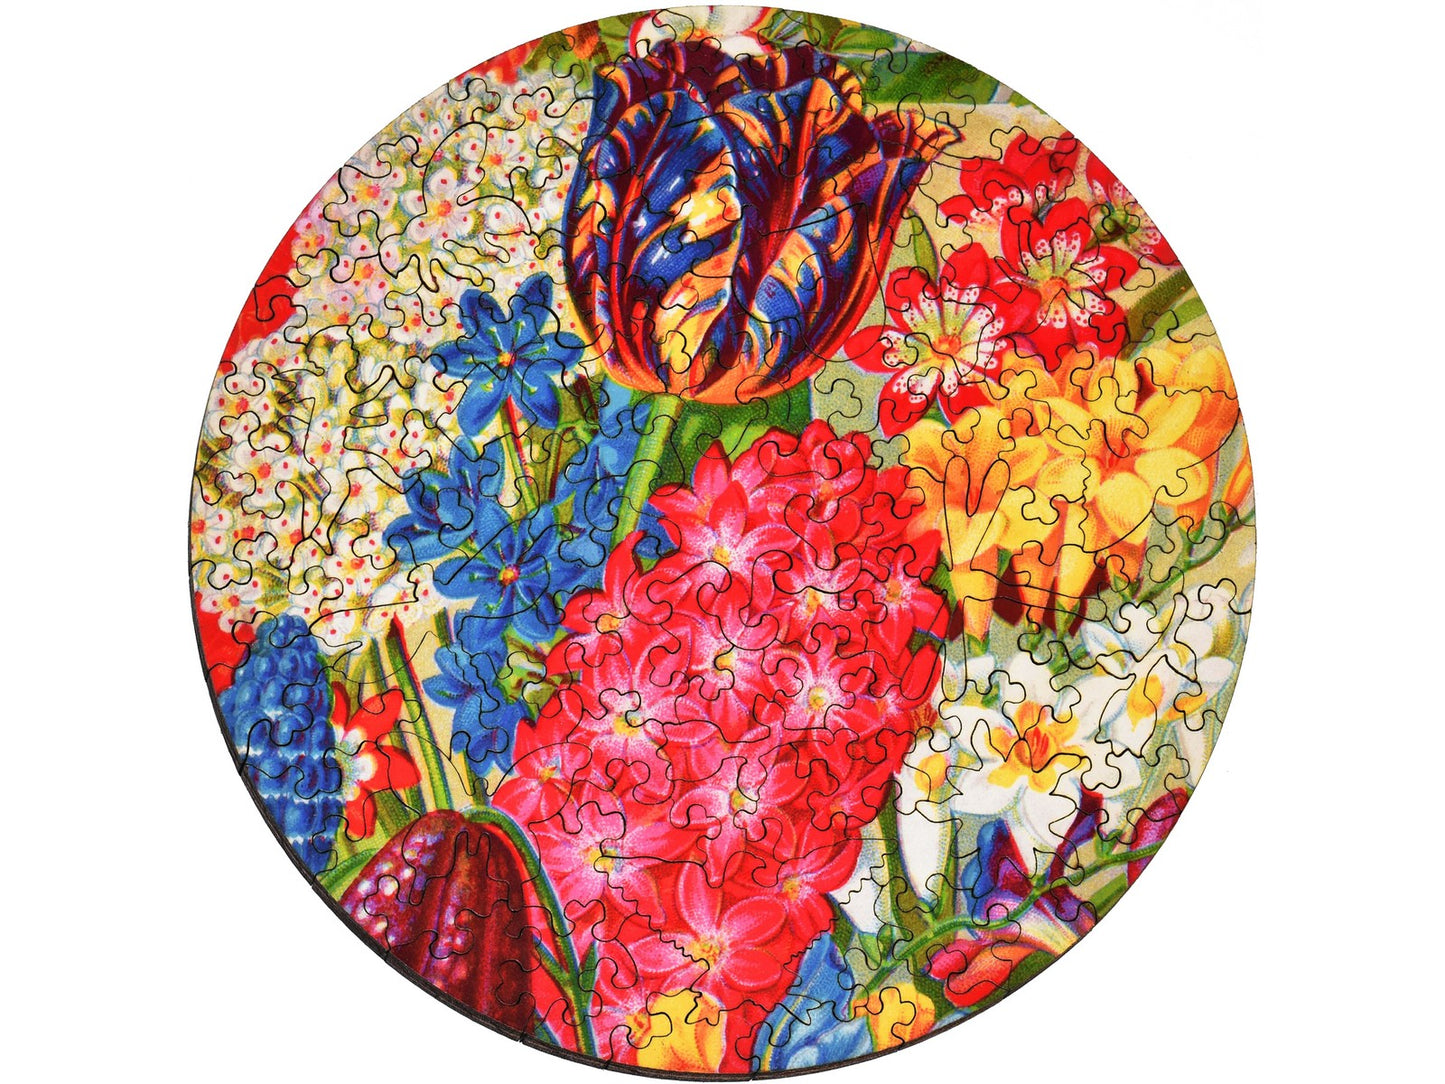 The front of the puzzle, Mayflower Premium Bulbs, which shows lots of colorful springtime flowers.